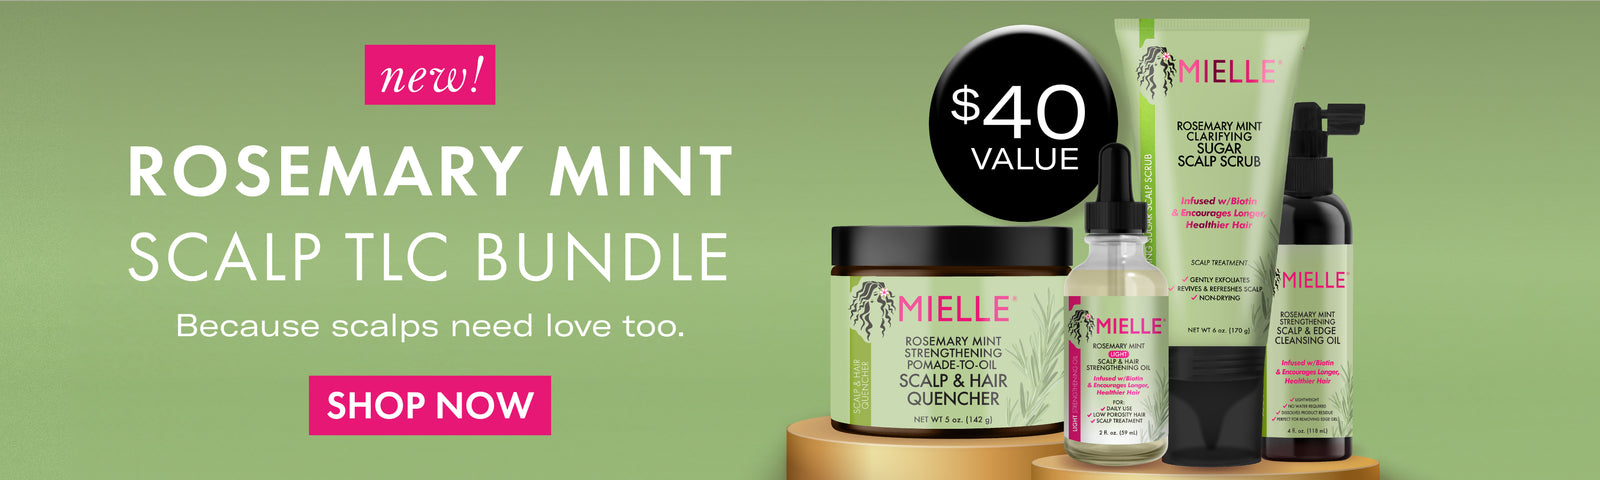 Banner image on the website of rosemary mint scalp TLC hair bundle.